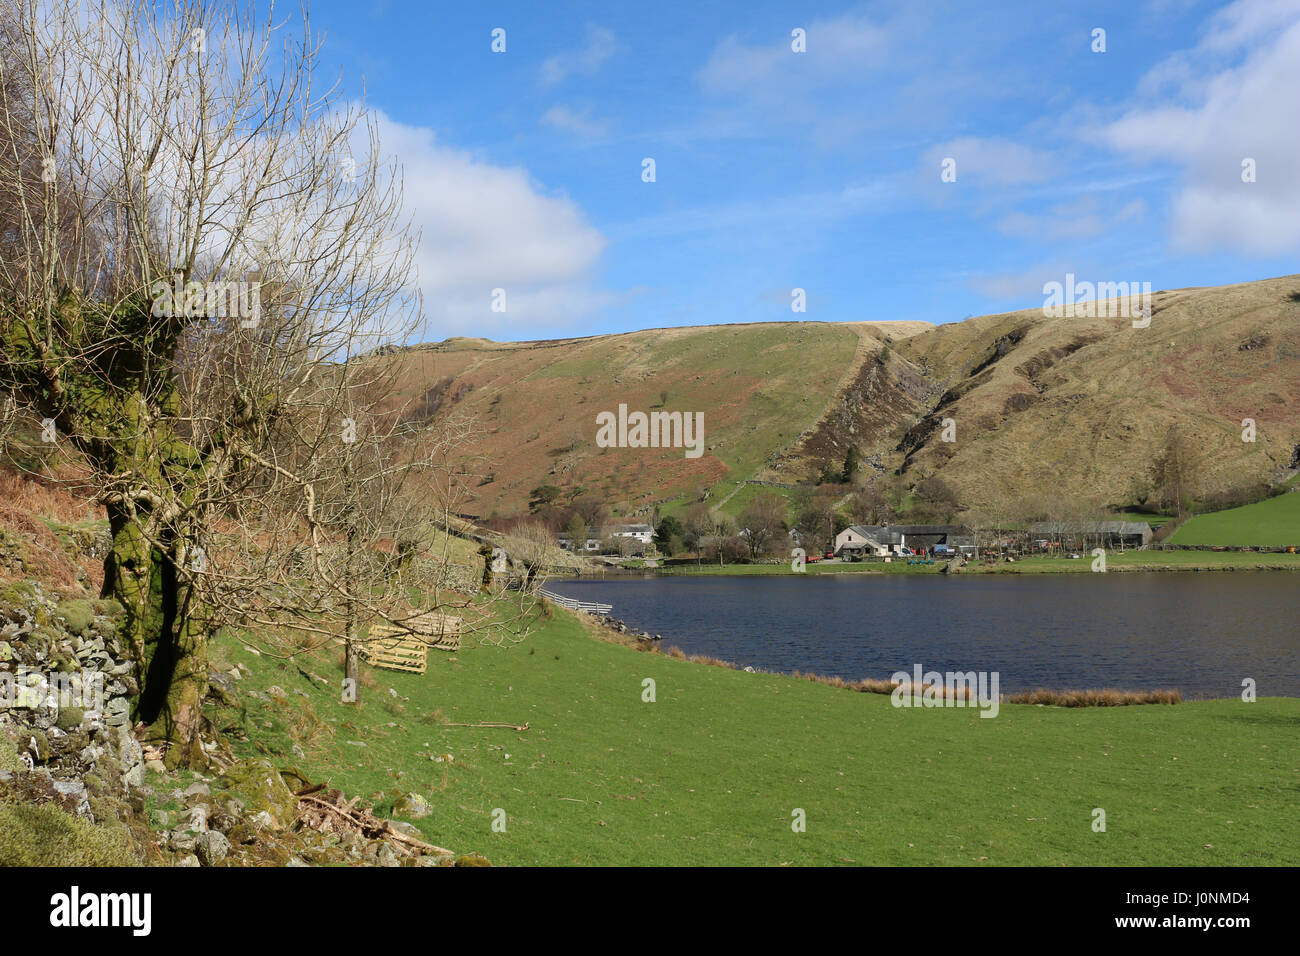 View of Watendlath Tarn in the English Lake District, Cumbria, England from the footpath to Dock Tarn, At left is a pollarded tree. Stock Photo